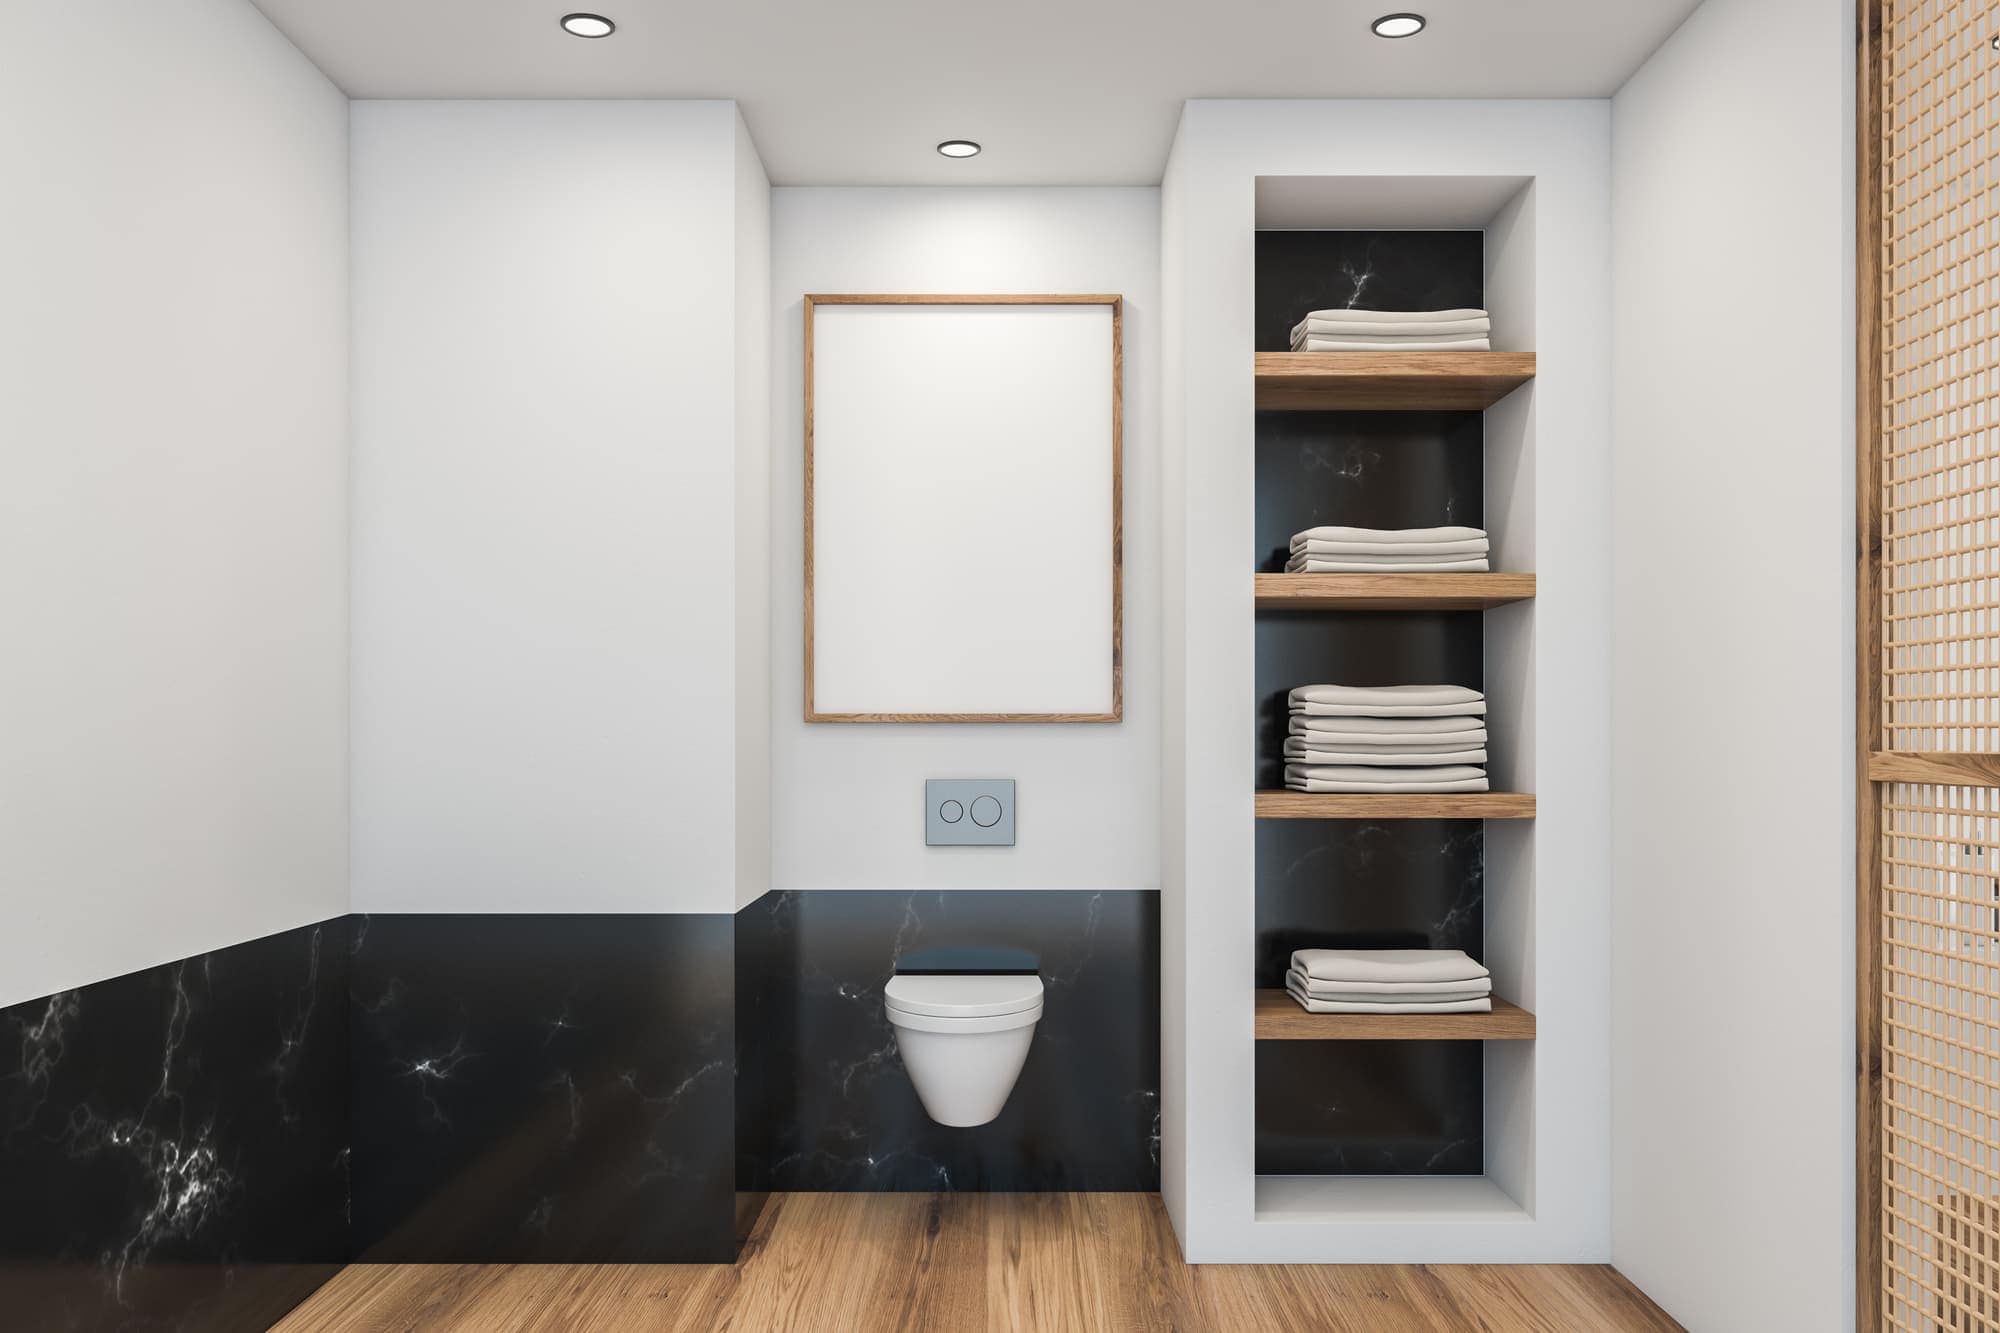 https://exprealty.com/wp-content/uploads/what-is-a-water-closet.jpg